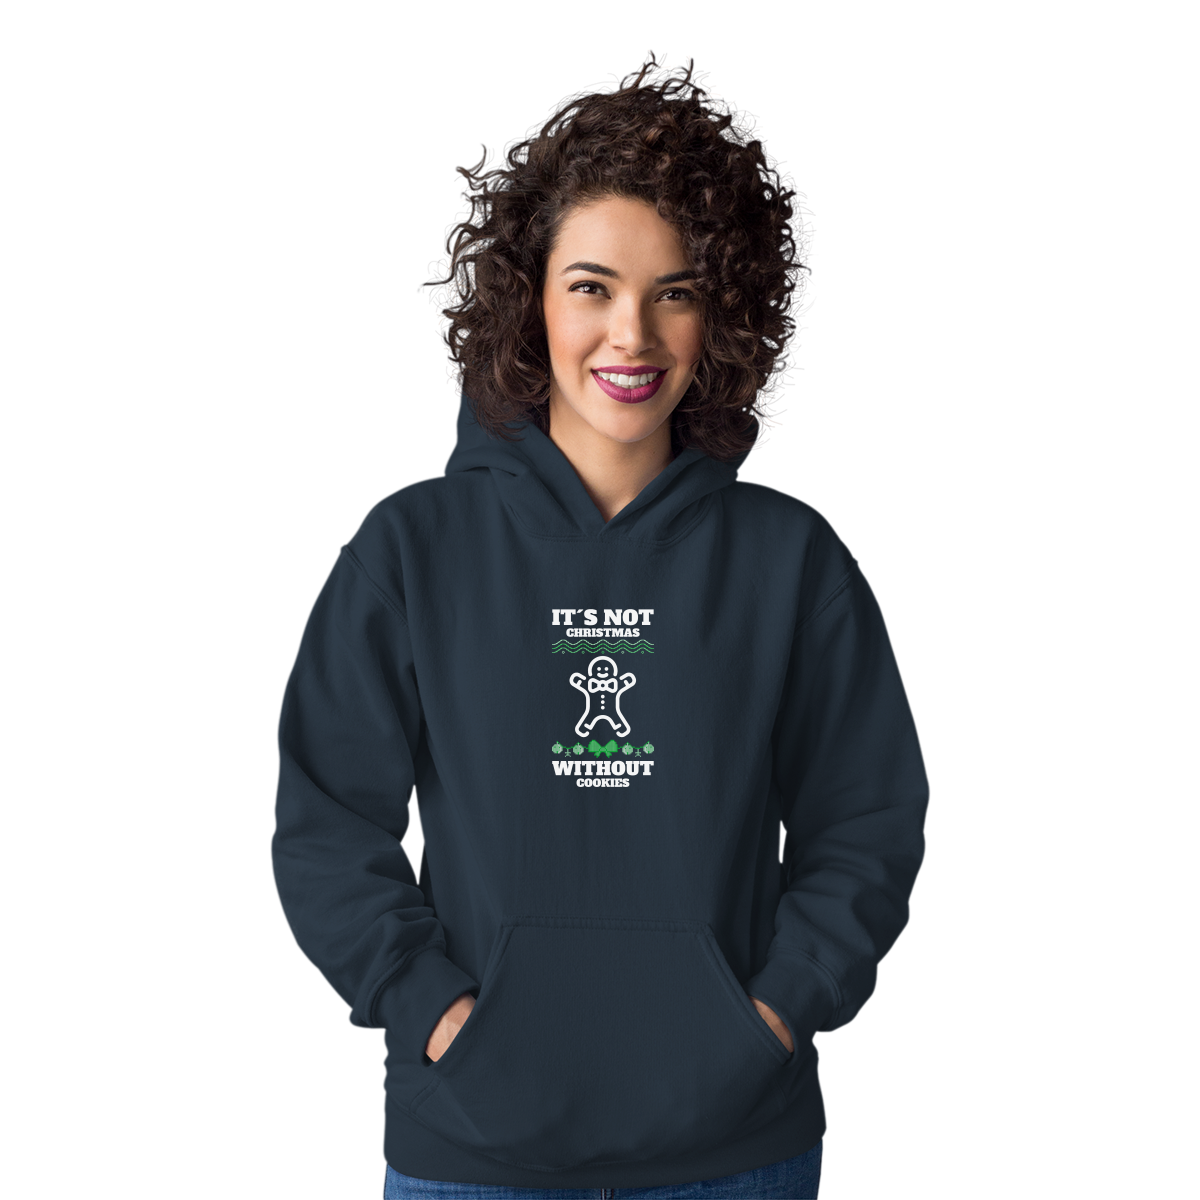 It's Not Christmas Without Cookies Unisex Hoodie | Navy